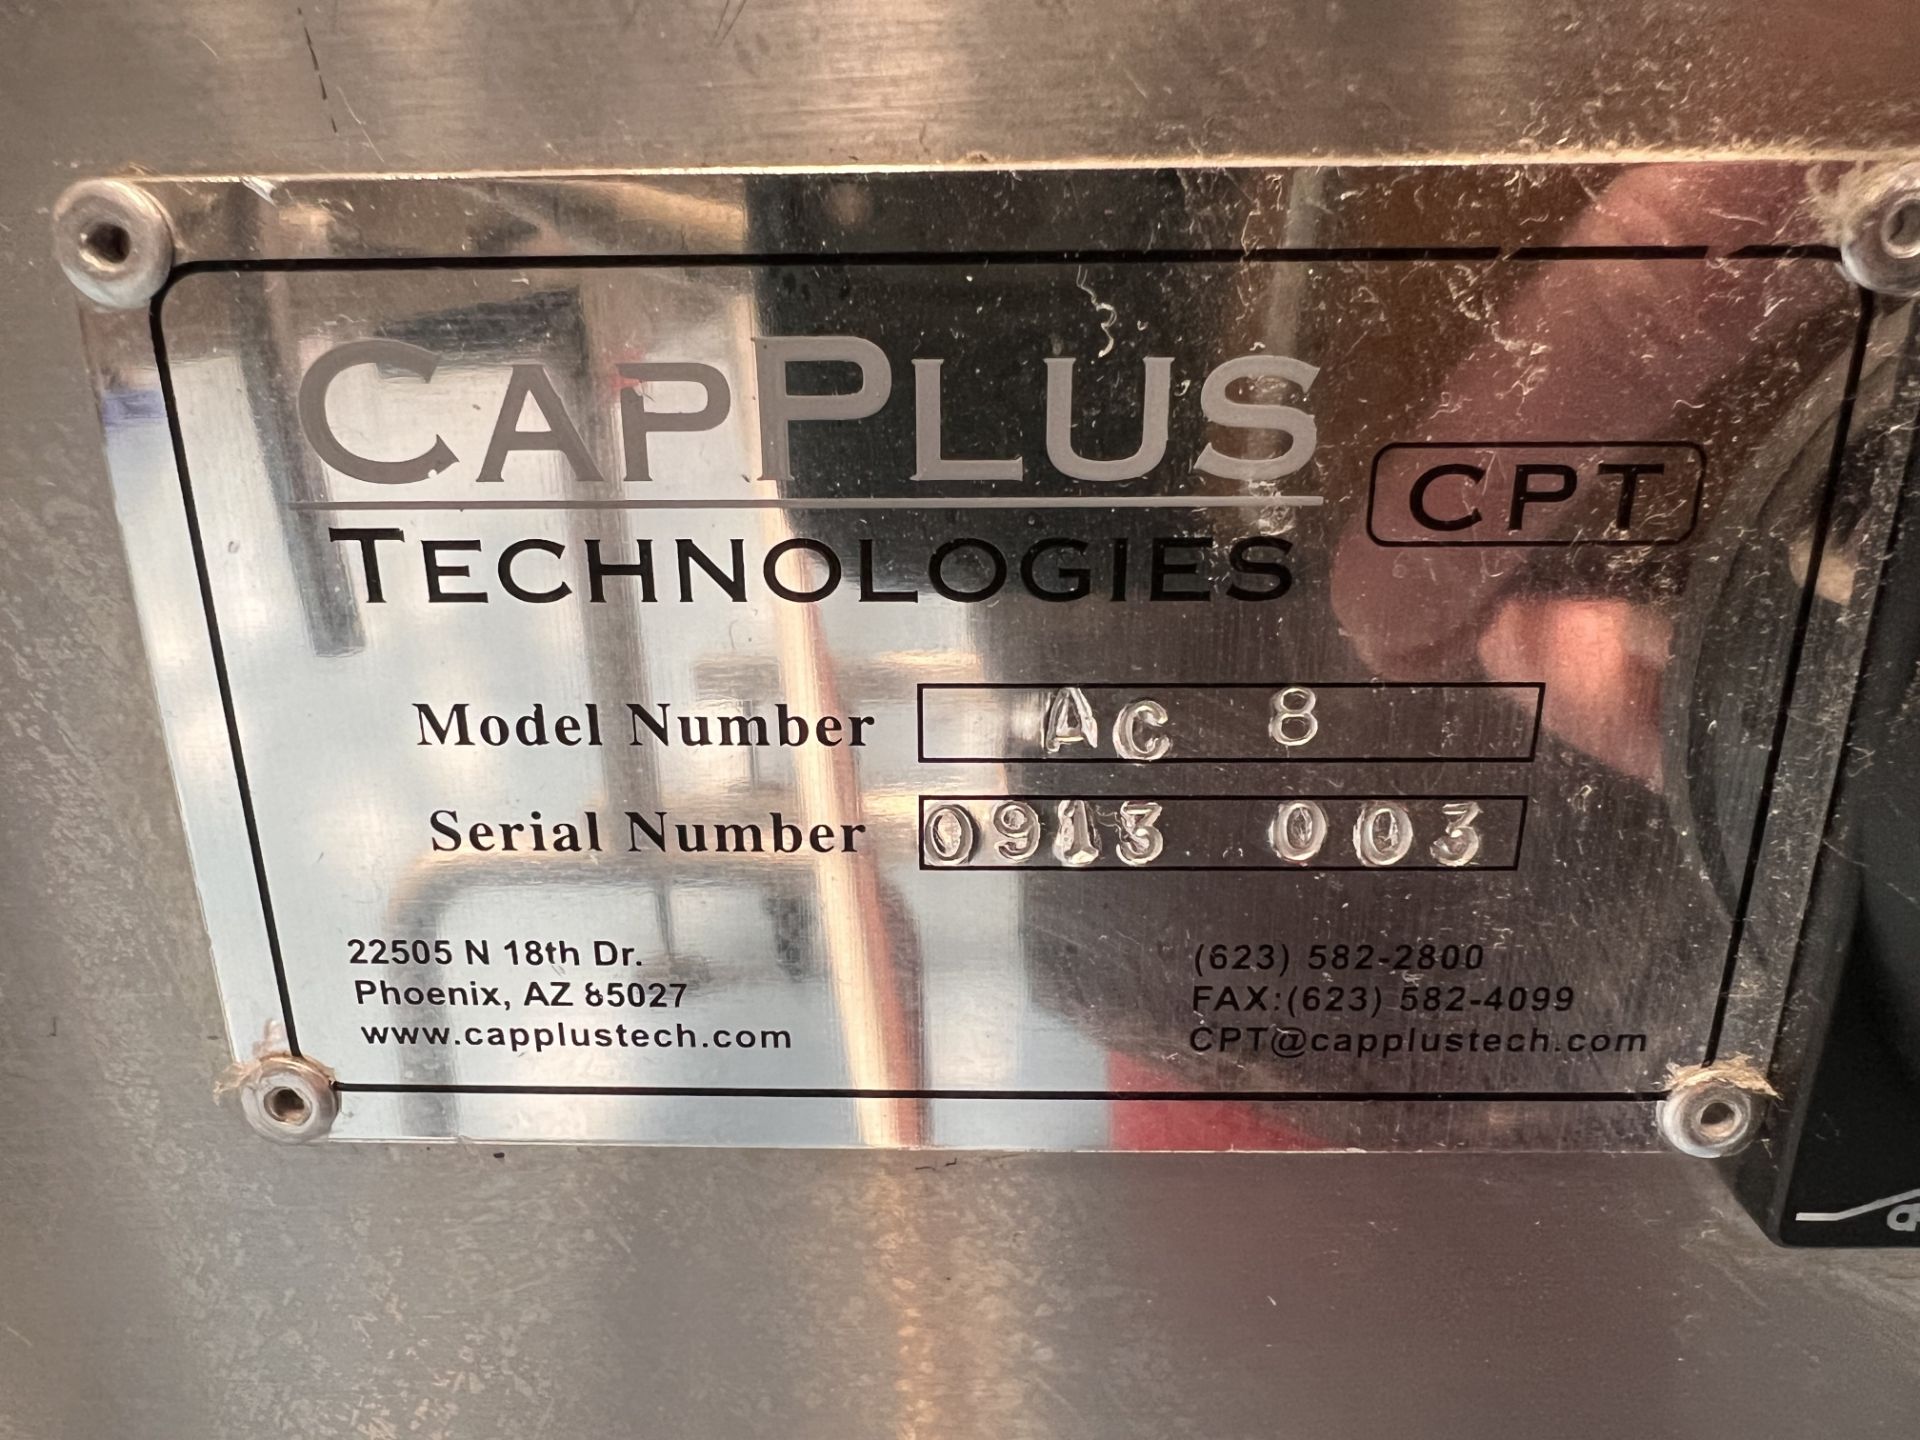 CAP PLUS TECHNOLOGIES STRAIGHT LINE 8-SPINDLE CAPPER, MODEL AC 8, S/N 0913 003, INCLUDES ELEVATING - Image 12 of 17